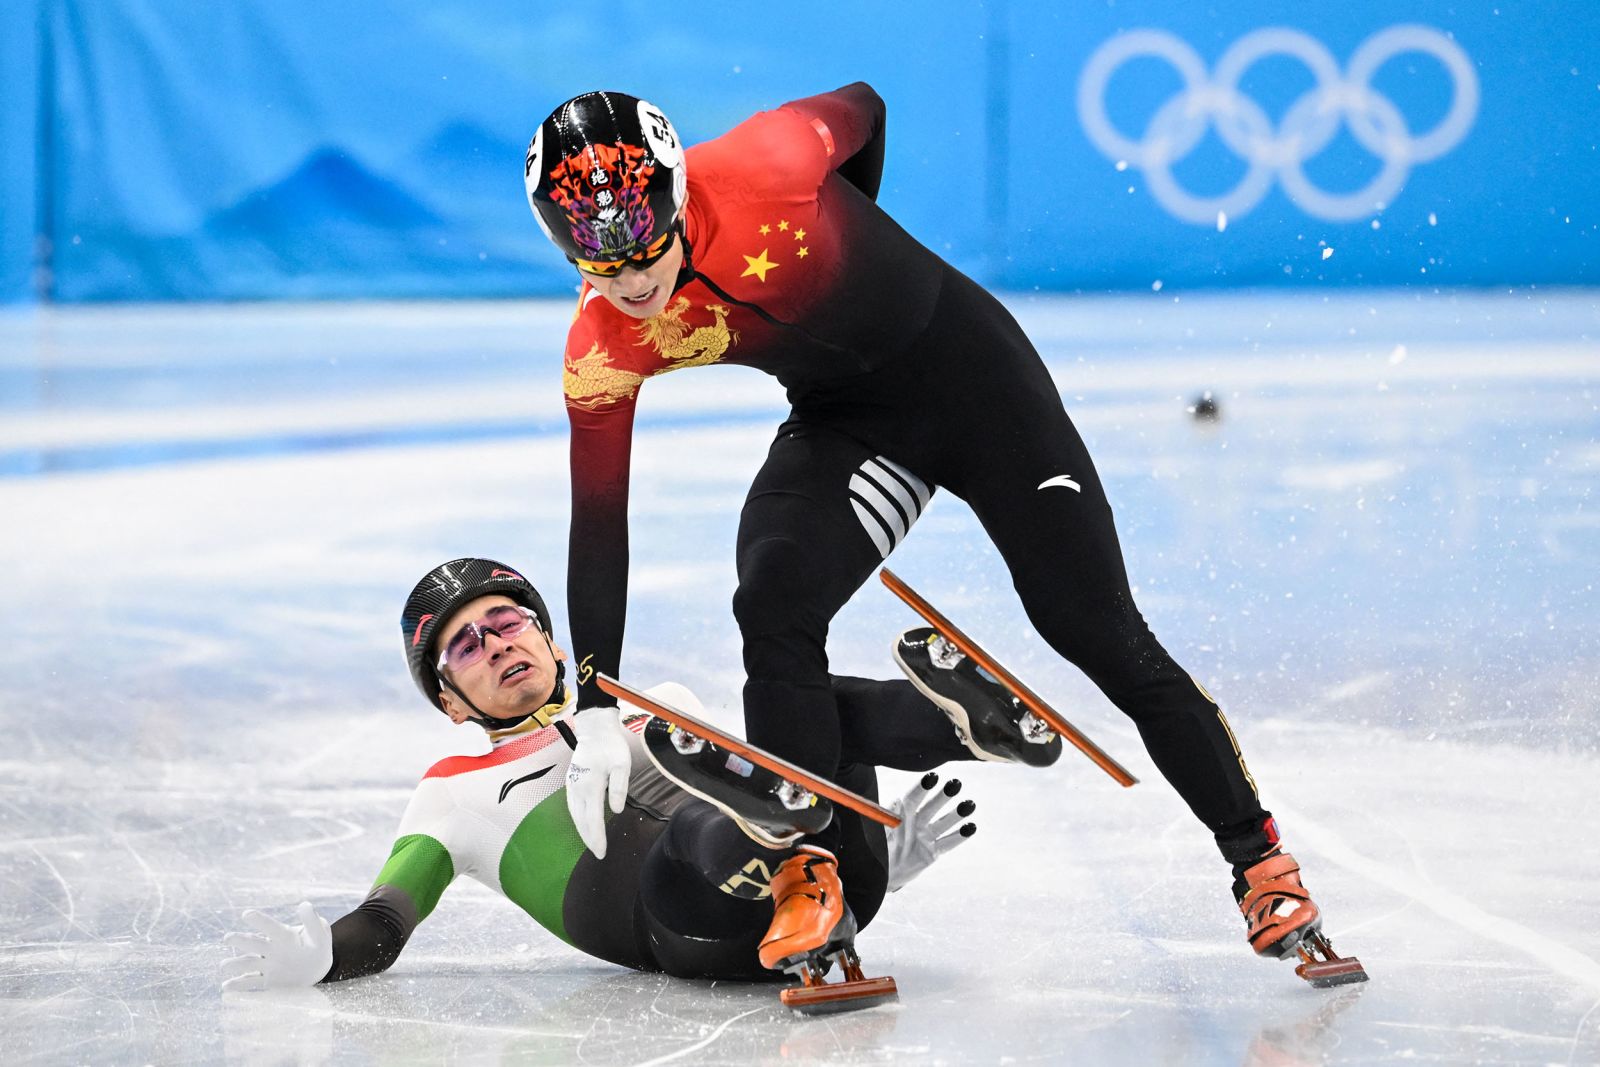 From left, Hungary's Shaolin Sándor Liu gets tangled up with China's Ren Ziwei after crossing the finish line in the 1,000-meter short track final. Liu crossed the finish line first, but Ren was awarded the gold medal after Liu was given a yellow card and two penalties for illegally changing lanes and causing contact with Ren.